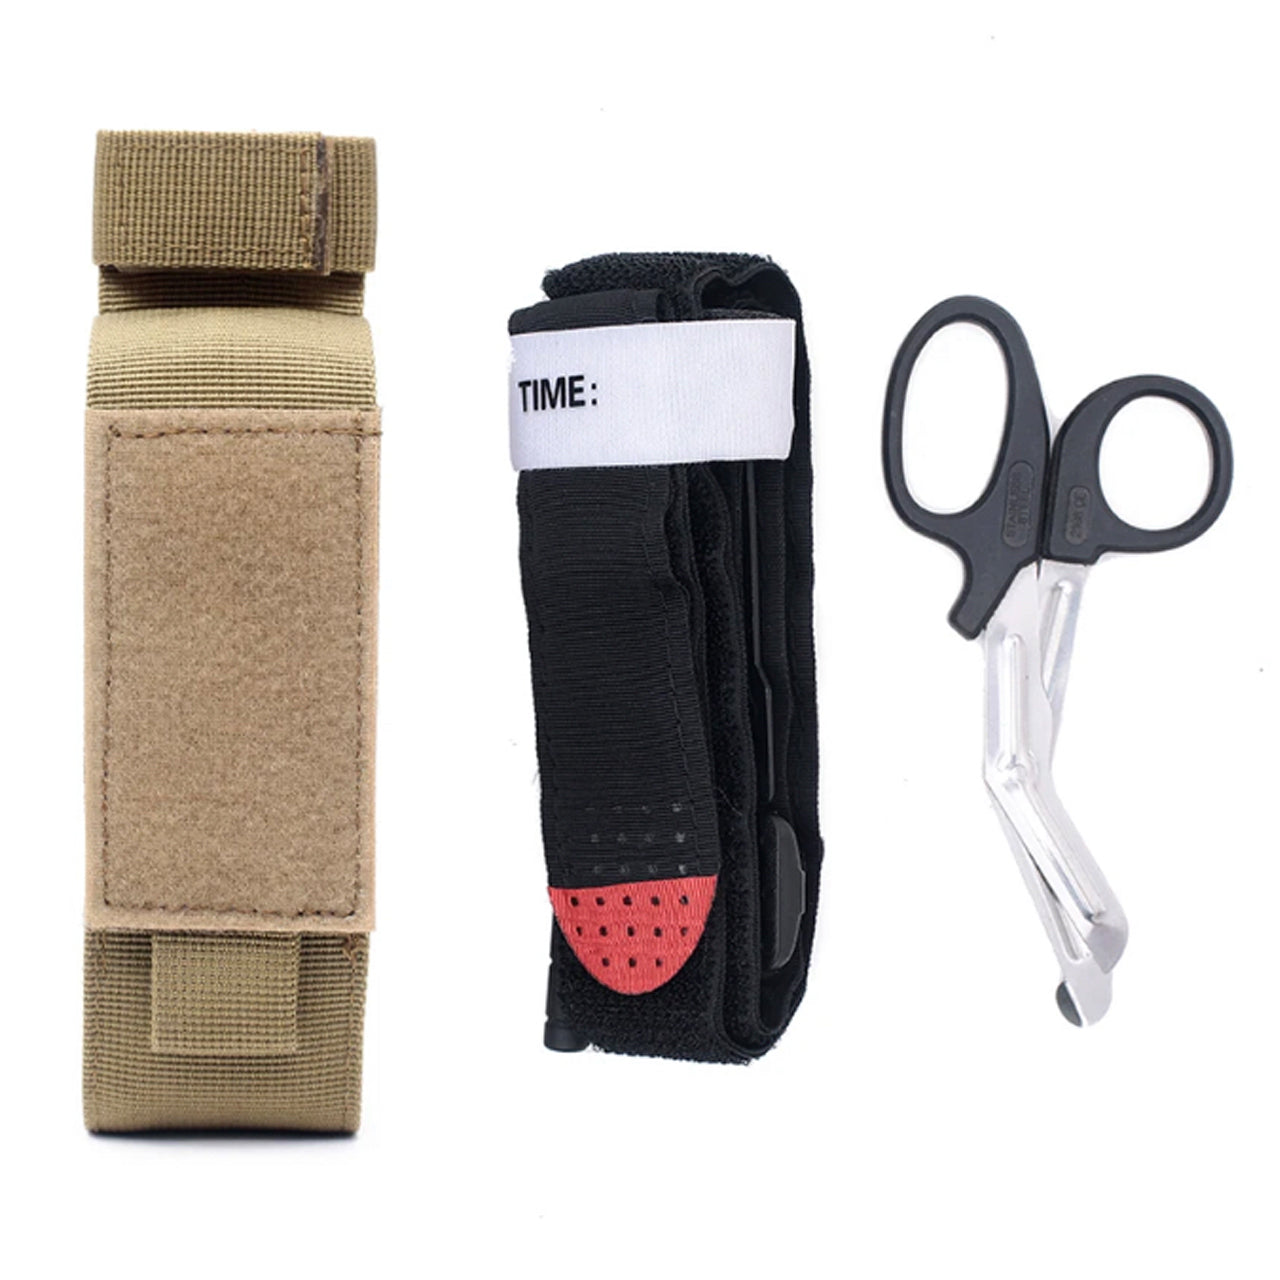 Secure your CAT7-Tourniquet and shears with this MOLLE system pouch! A hook-and-loop fastener ensures that you’ll have rapid access to your essential medical supplies in the heat of the moment. www.defenceqstore.com.au